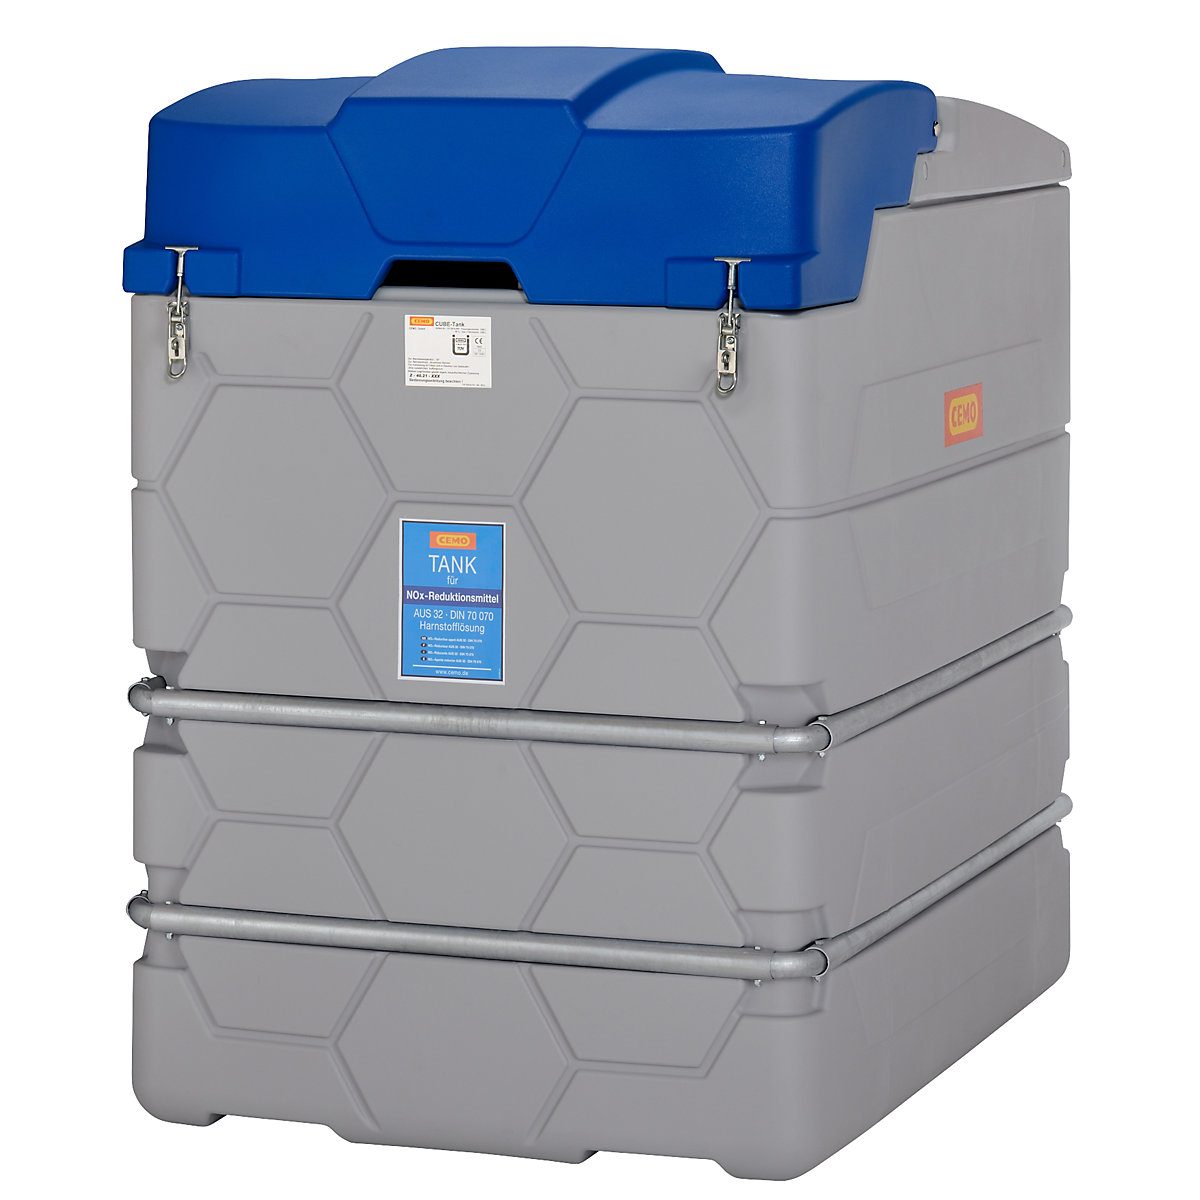 CUBE tank for AUS 32 (AdBlue®) – CEMO, Outdoor Basic, with hinged lid, height 1800 mm, capacity 2500 l-5